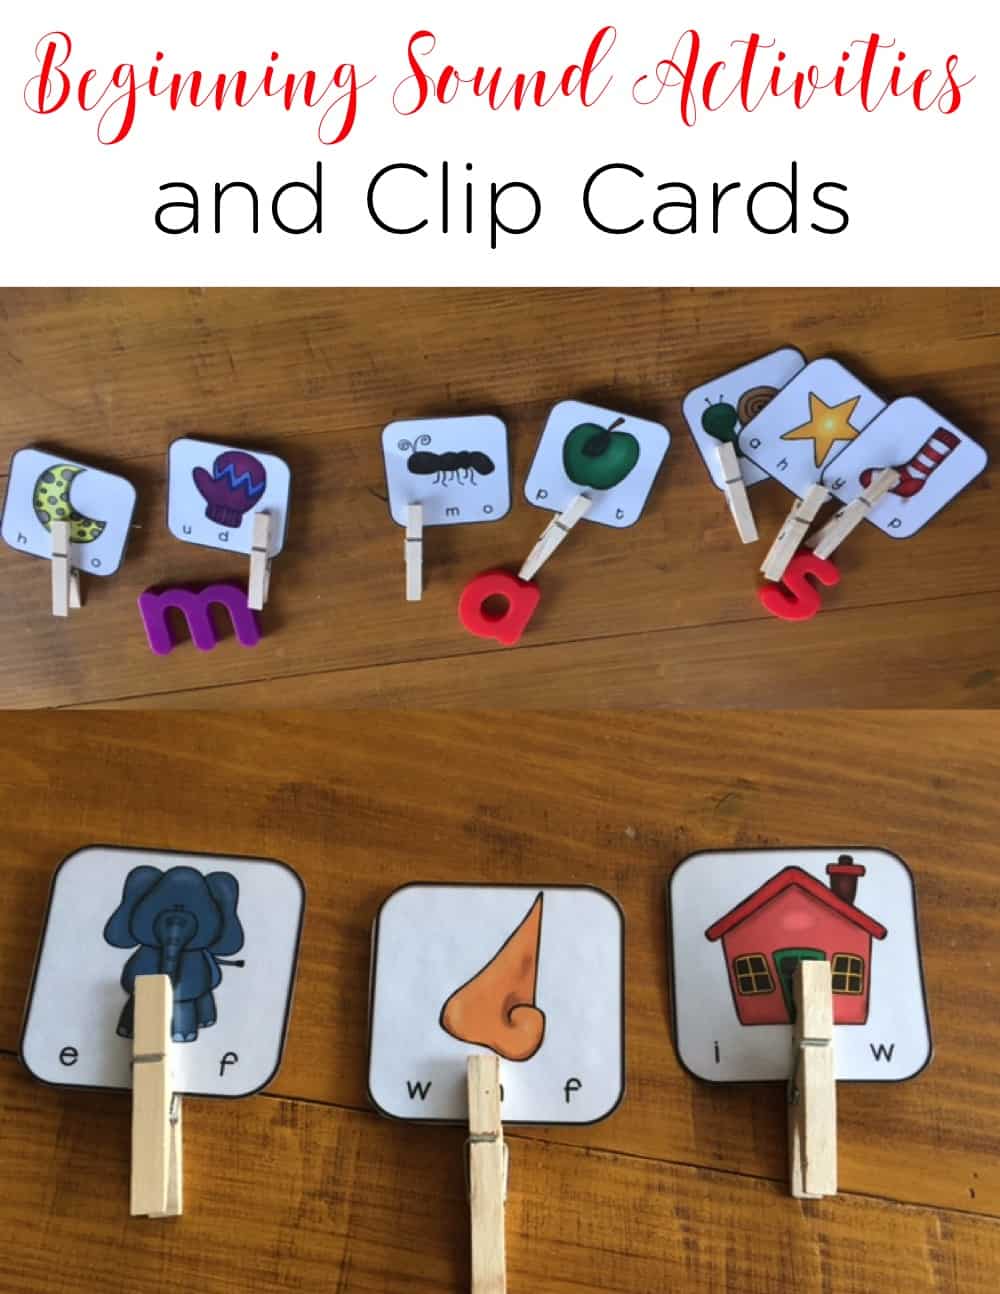 These beginning sound activities are the perfect way to integrate fine motor practice and phonics! The clip cards can be used in a work station, a small group, or during intervention time. #LiteracyCenters #Phonics